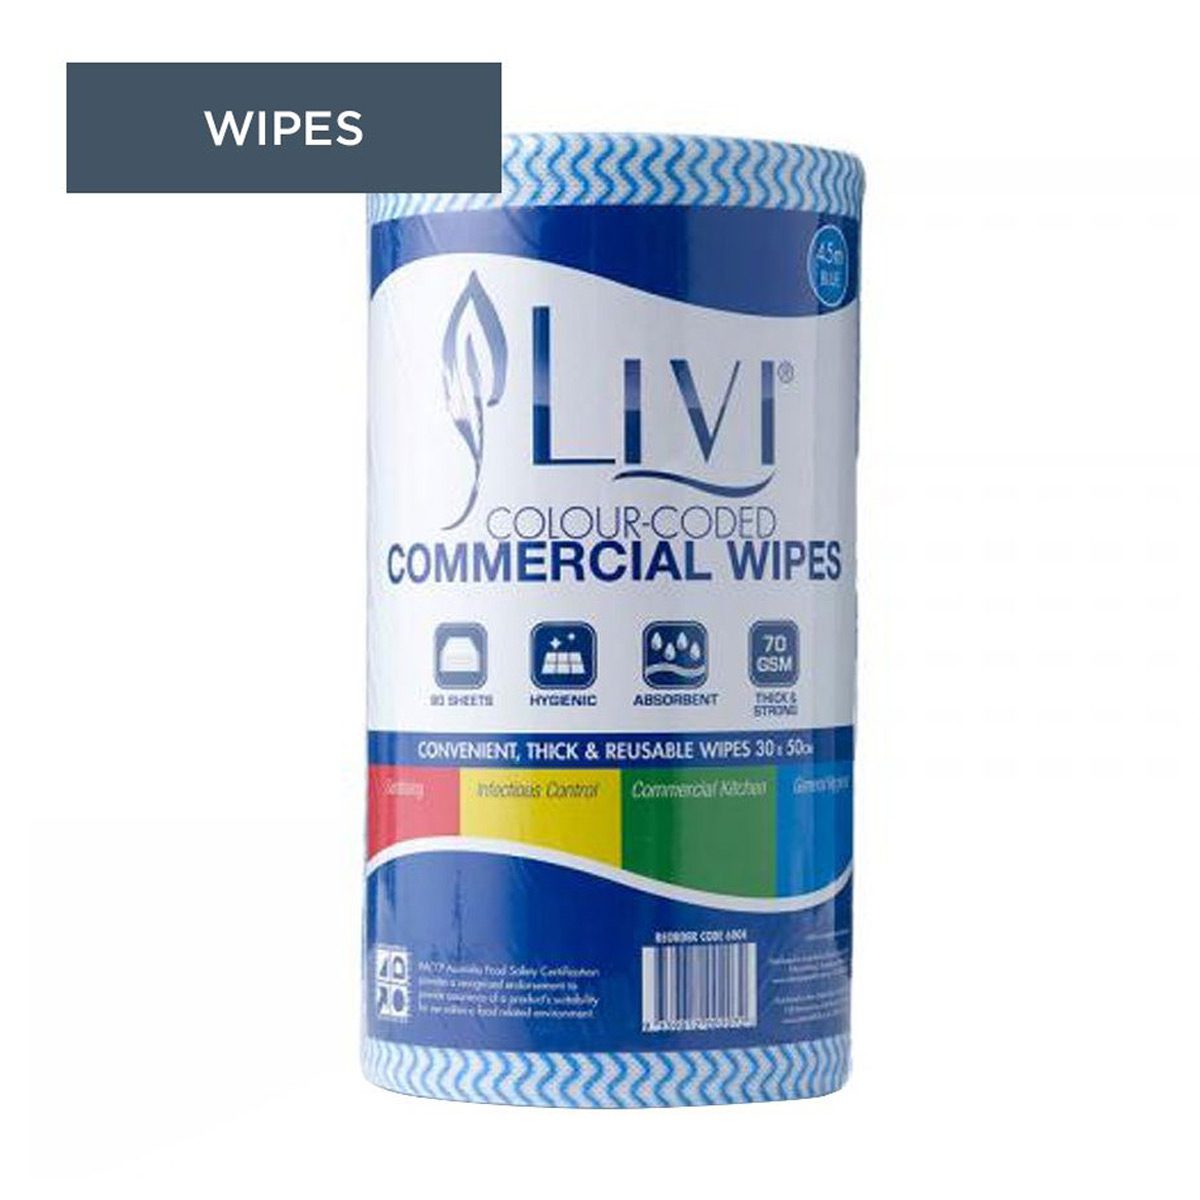 cleaning-equipment-cloths-scourers-wipes-livi-prem-blue-wipes-90-sheets-convenient-thick-reusable-hygienic-absorbent-perforated-roll-four-different-colours-vjs-distributors-6004